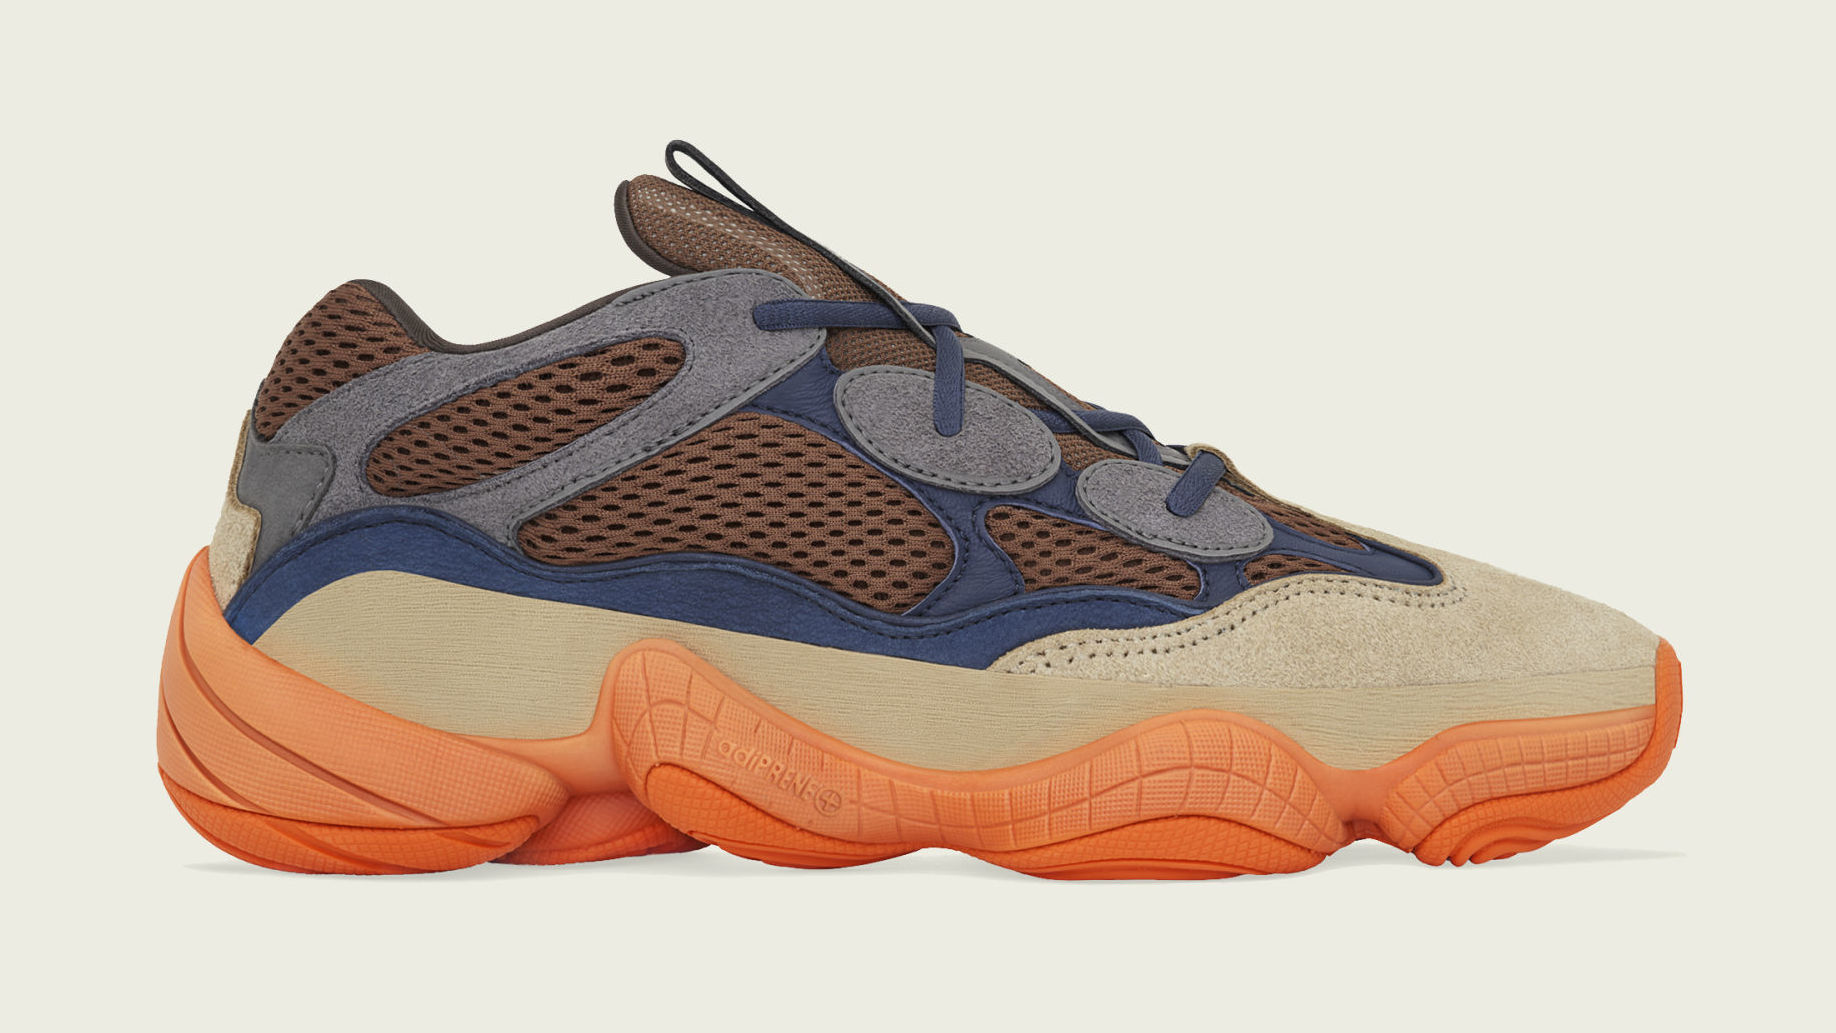 Adidas Yeezy 500 'Enflame' Release Date May 2021 Kanye West | Sole Collector